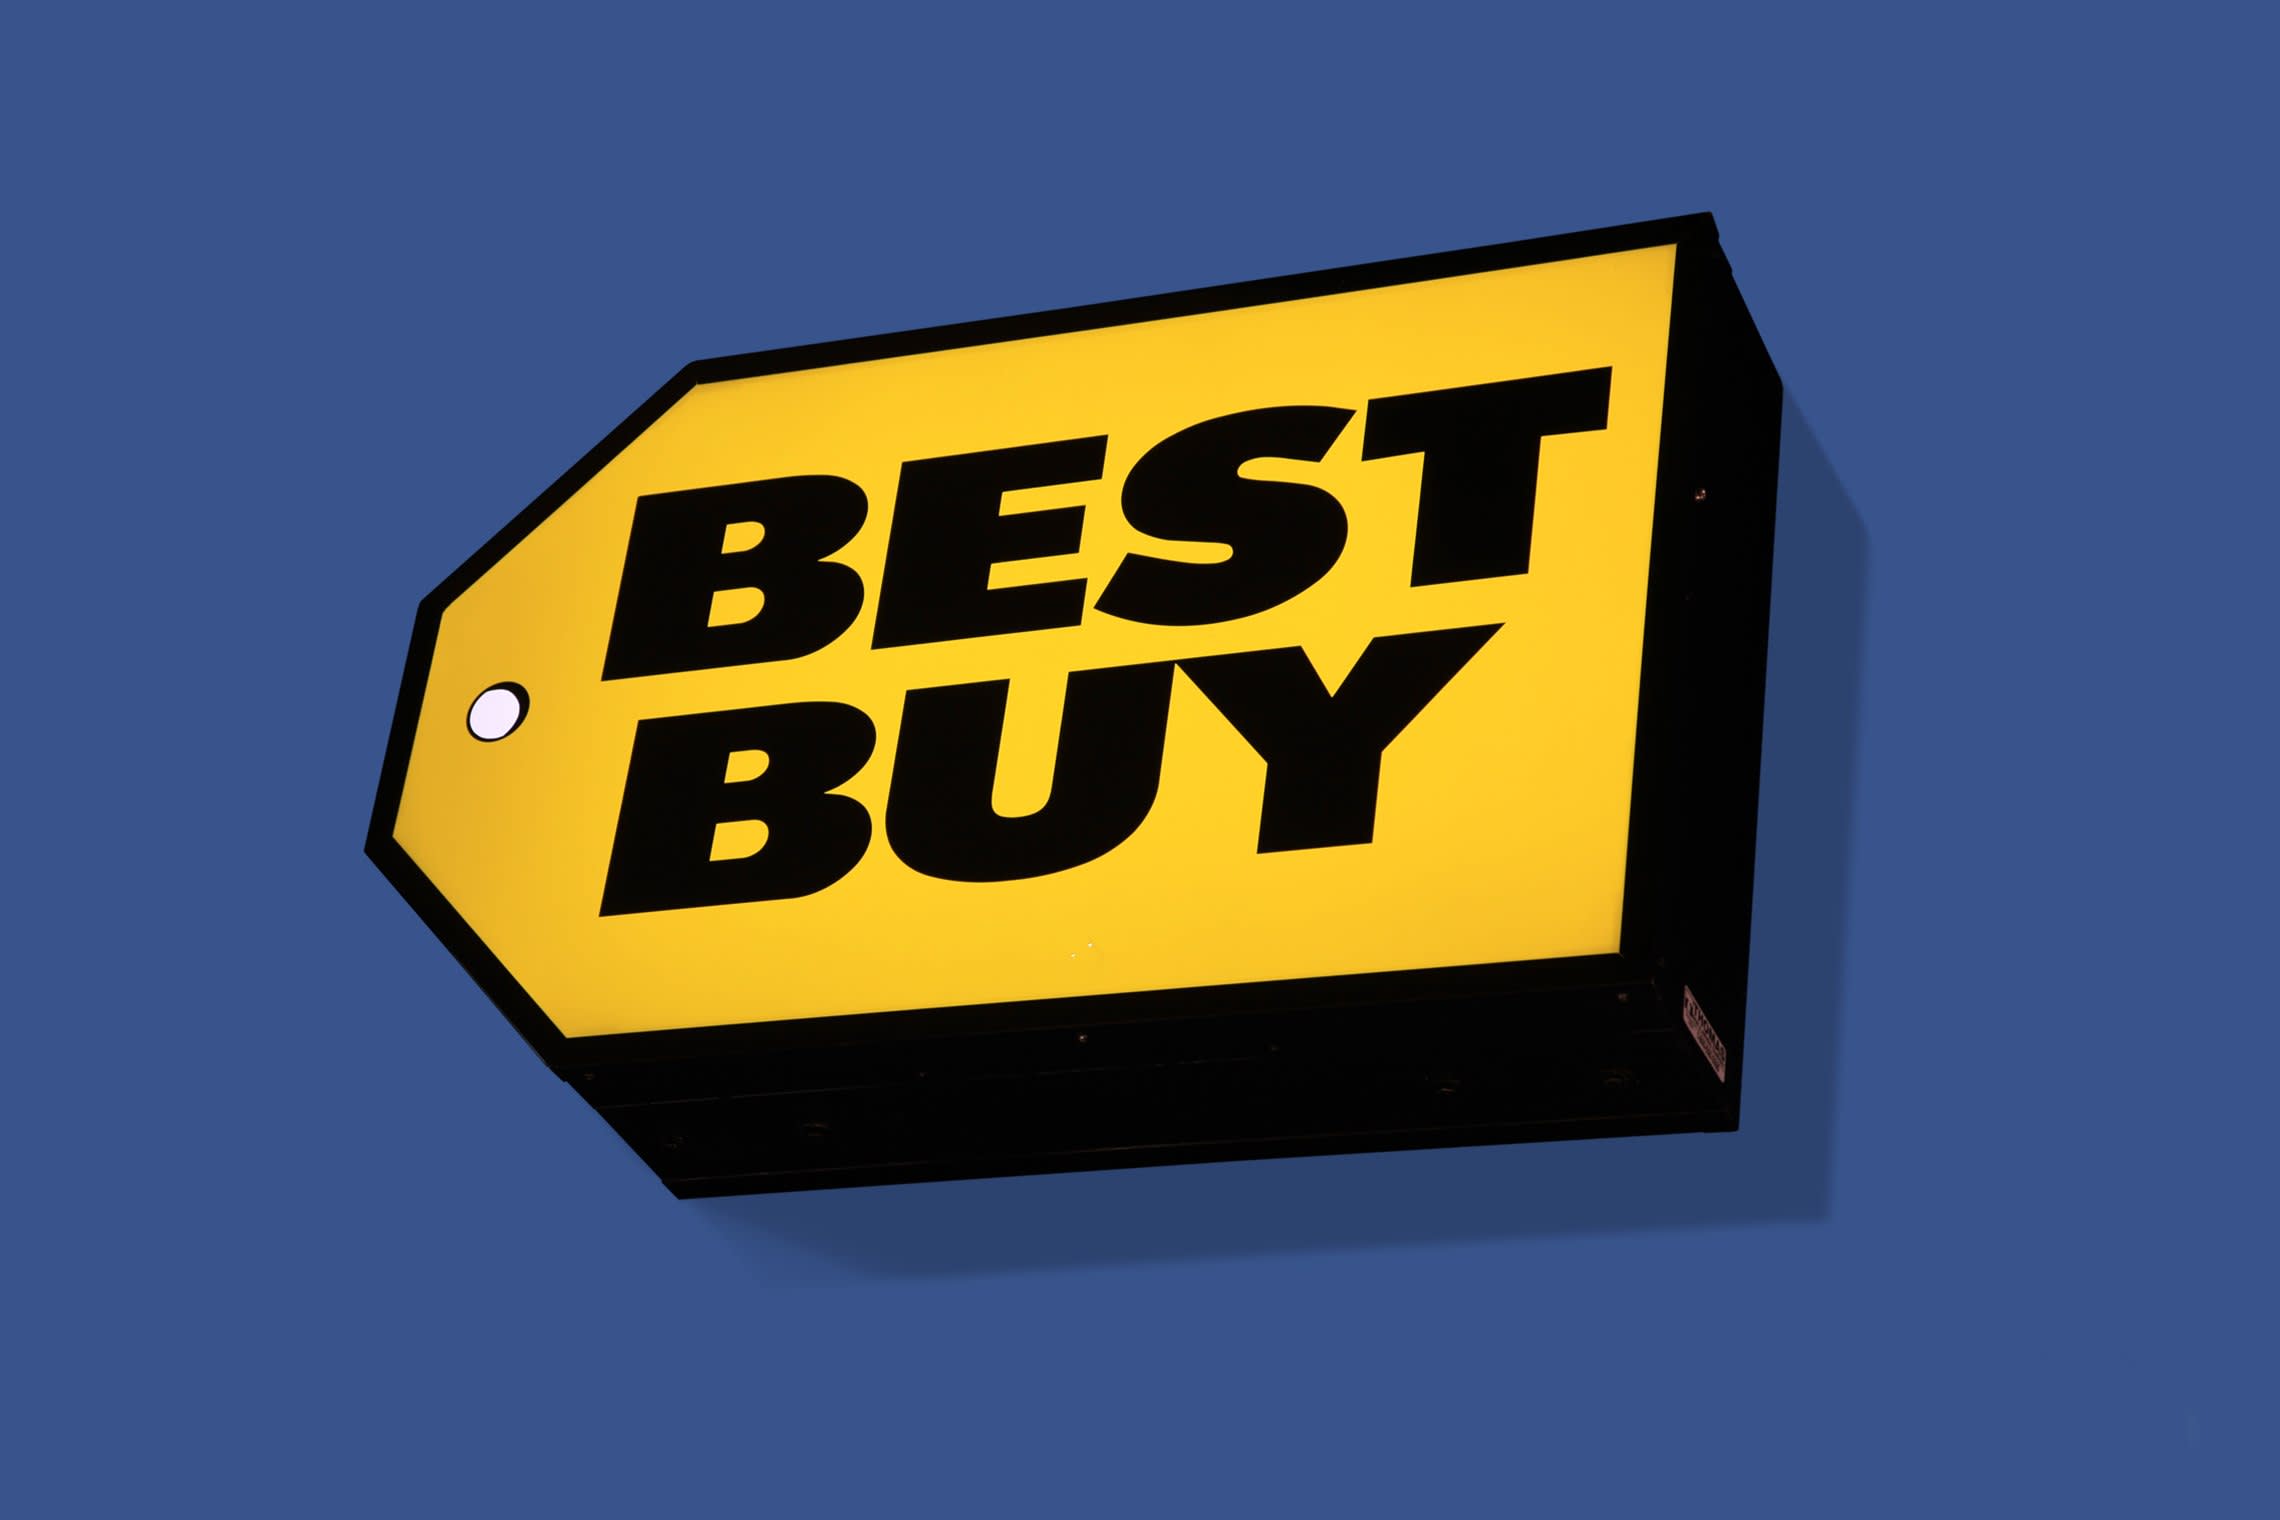 Best Buy Logo - Why Best Buy Failed in China